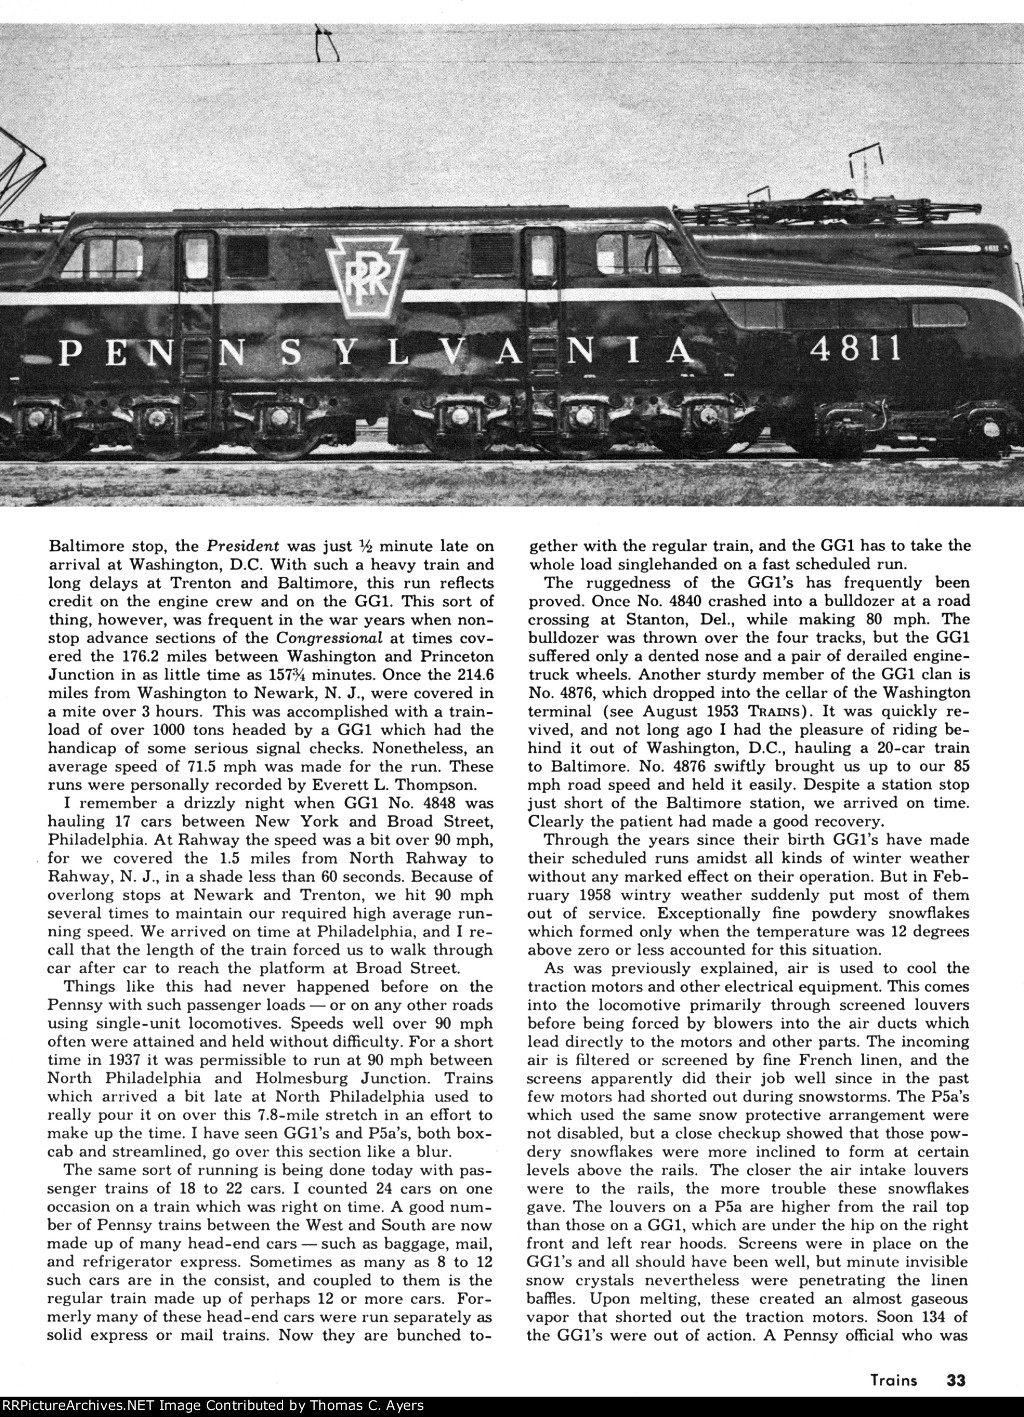 Story Of The GG-1, Page 33, 1964